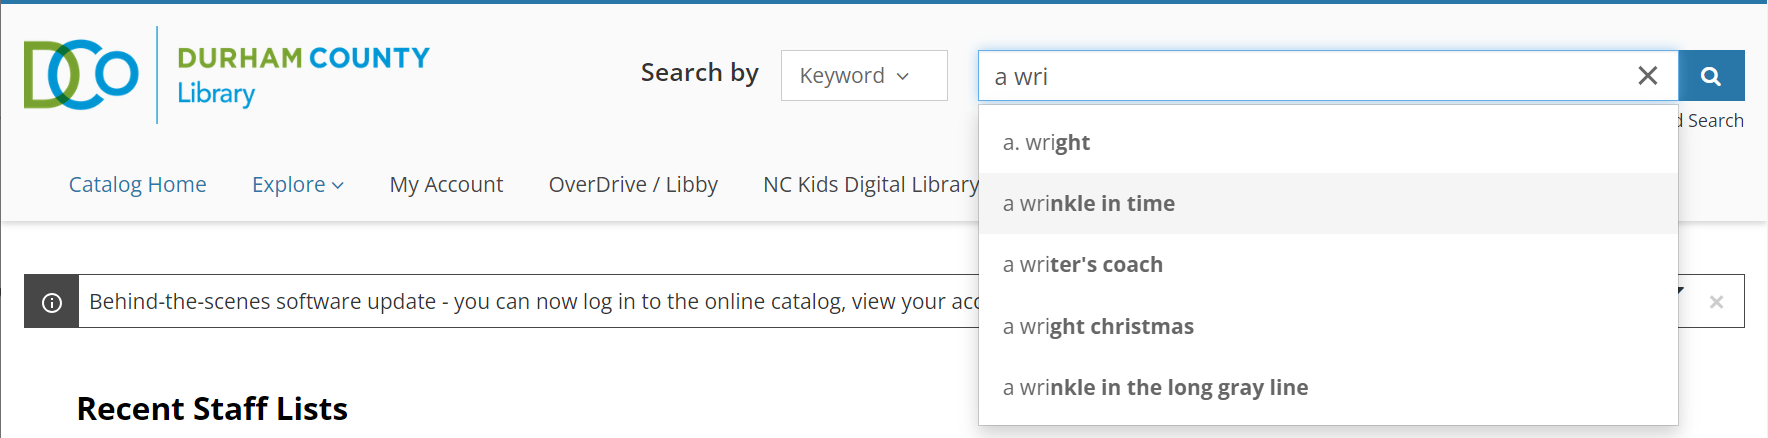 Basic text search with predictive results